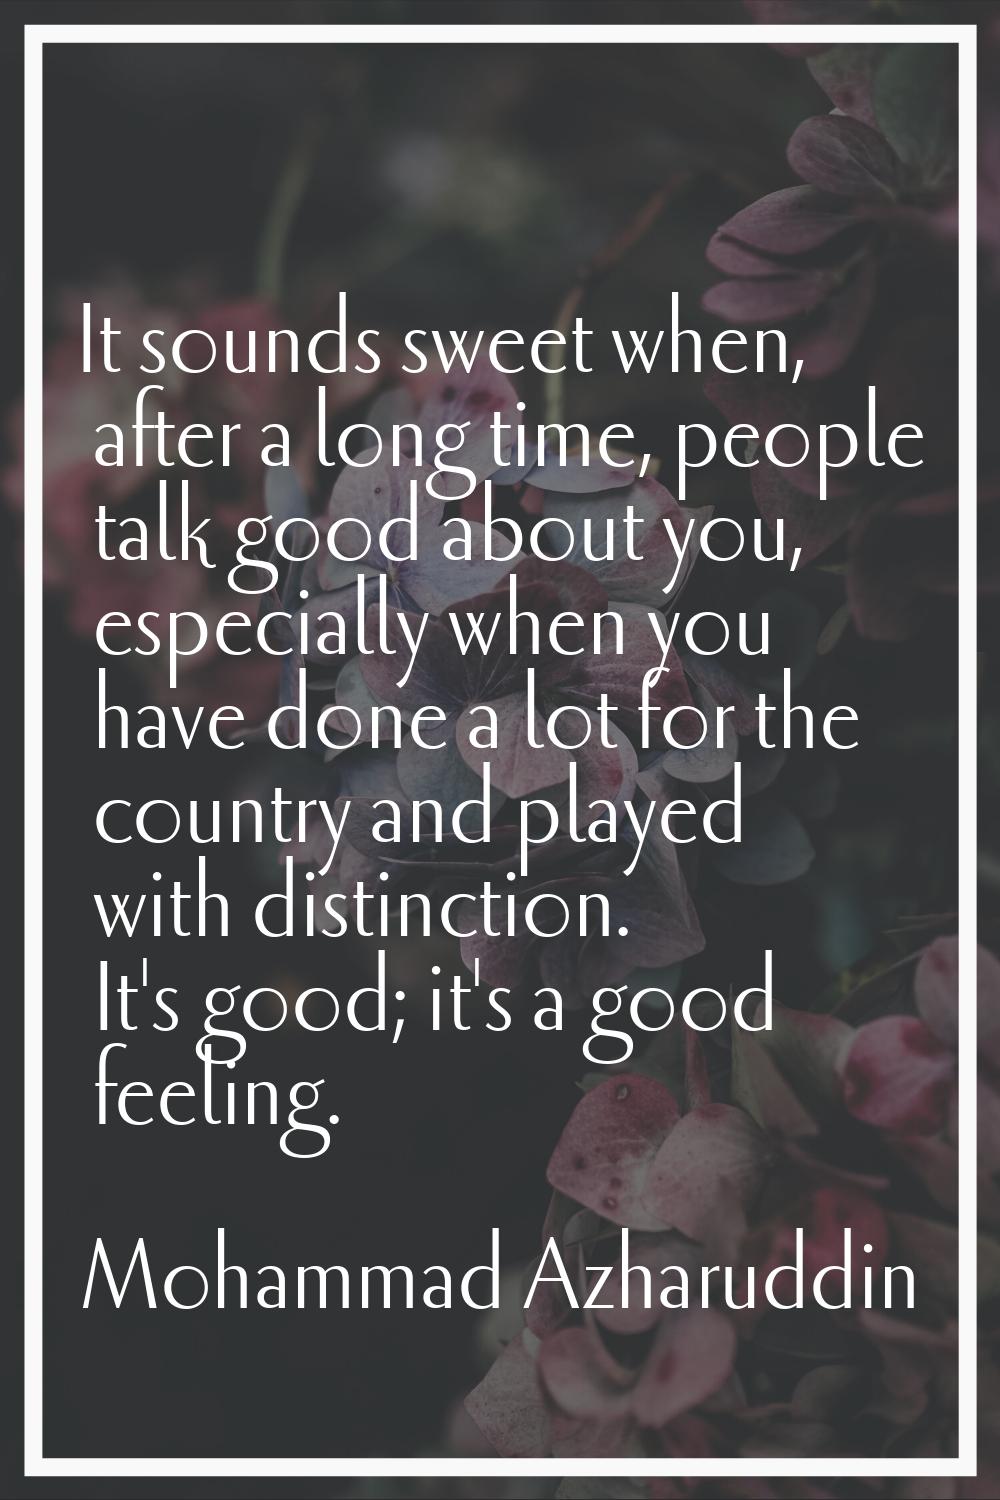 It sounds sweet when, after a long time, people talk good about you, especially when you have done 